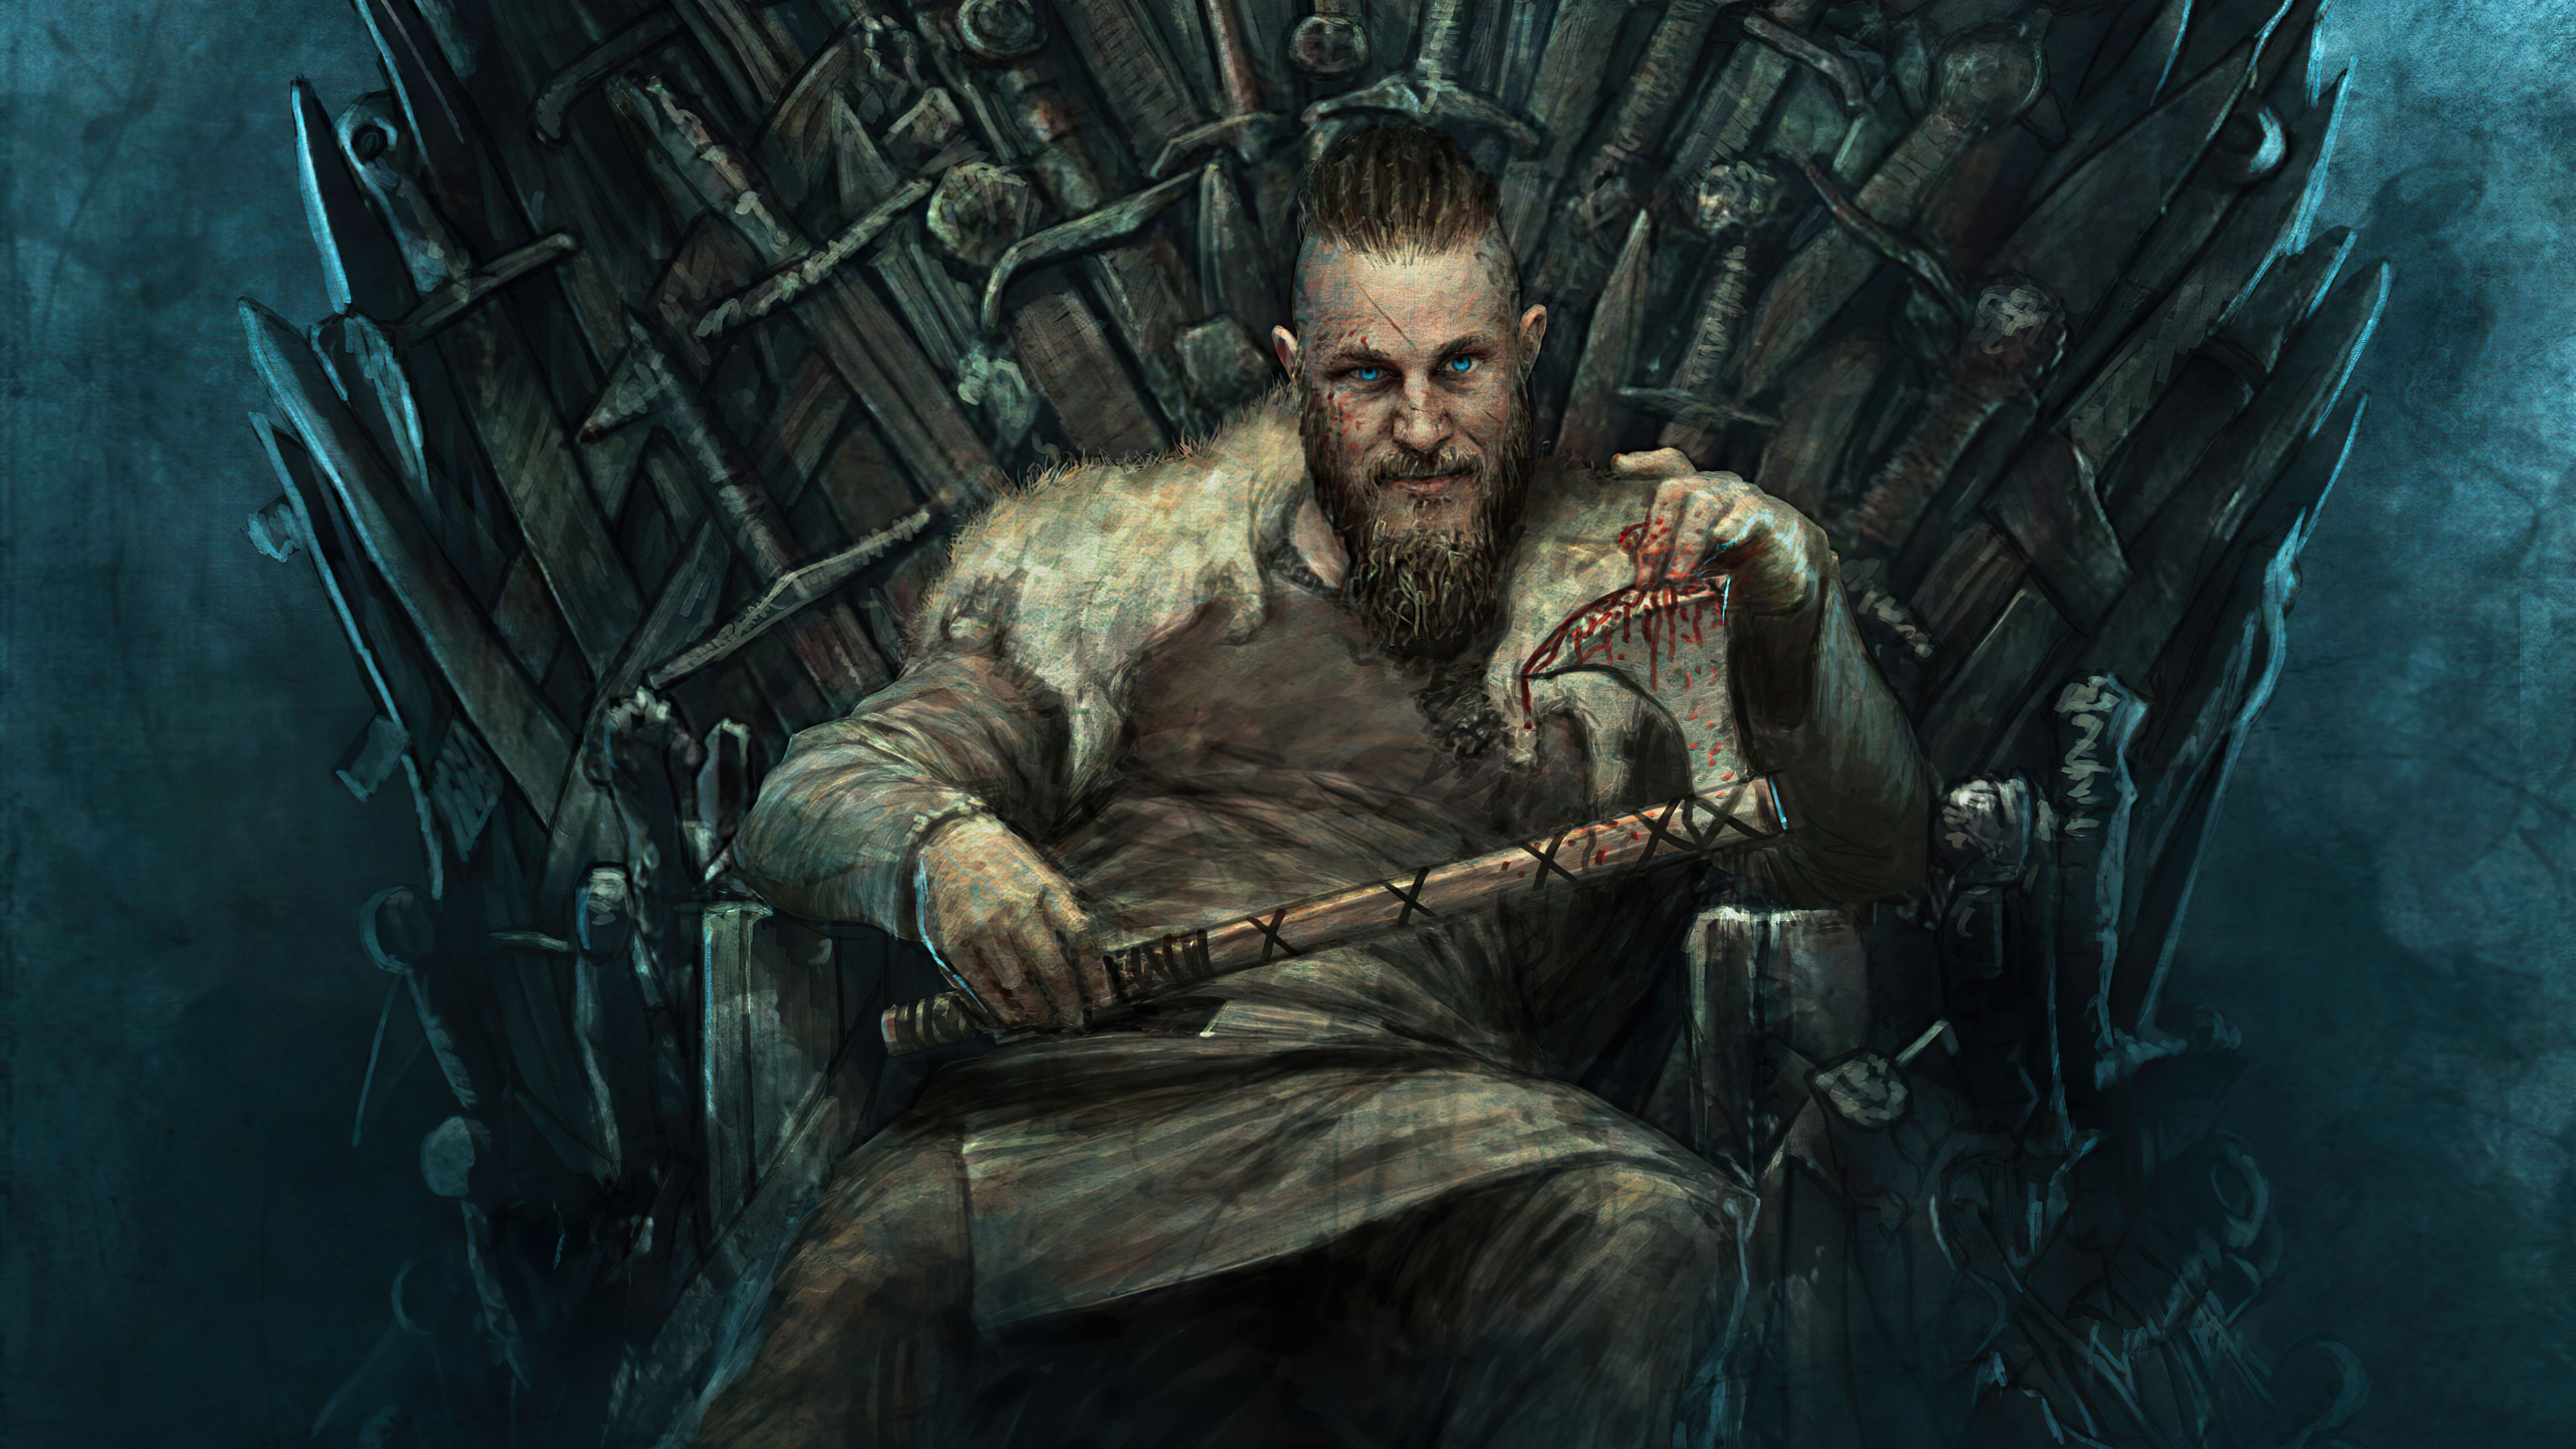 King Ragnar 4k, HD Tv Shows, 4k Wallpapers, Image, Backgrounds, Photos and Pictures...